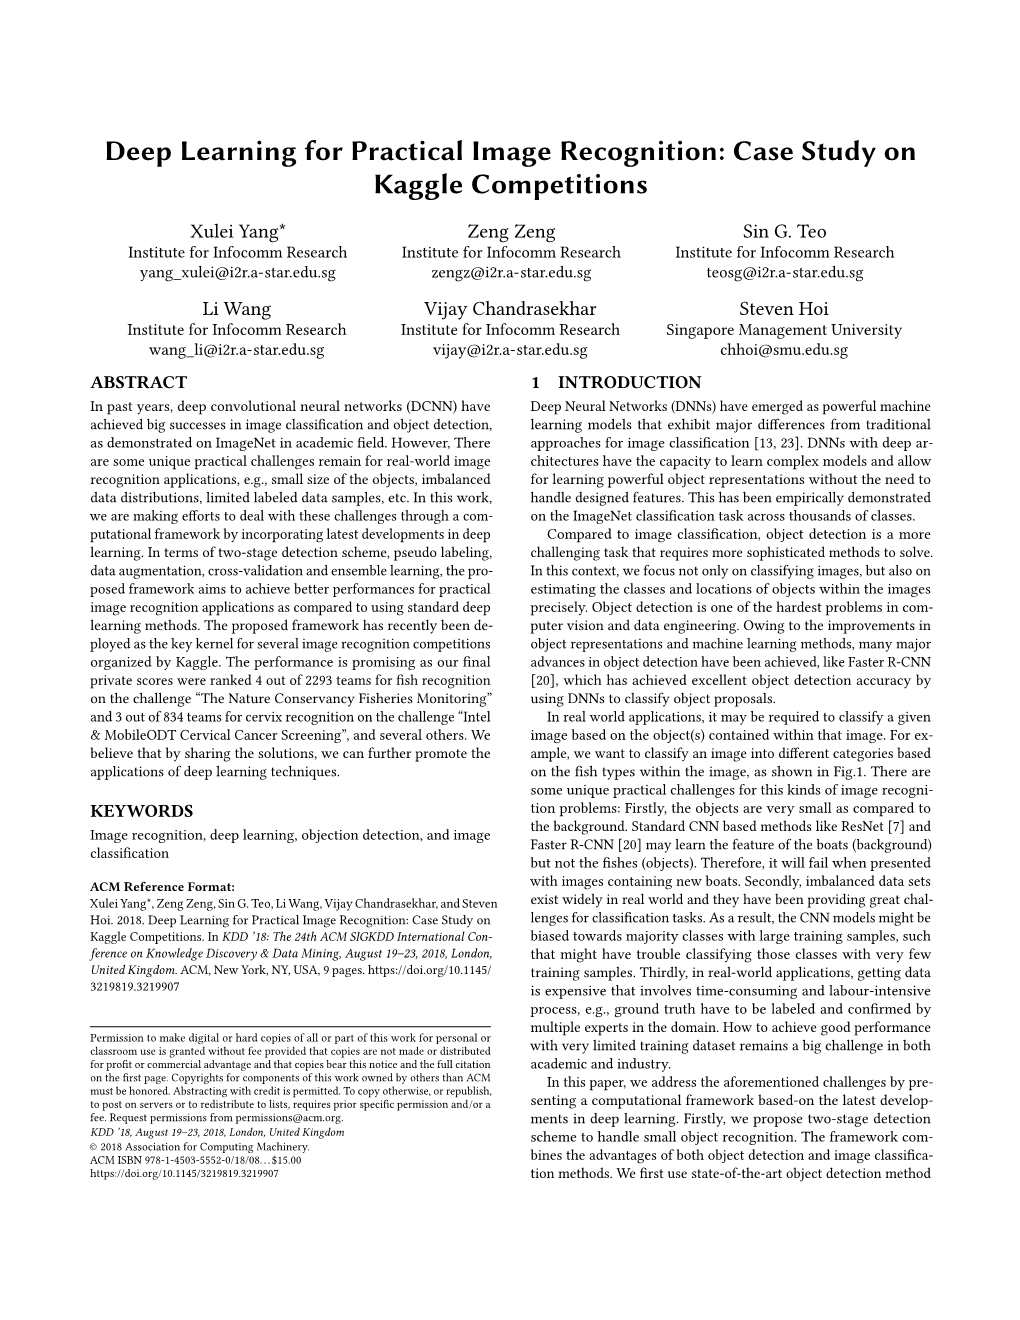 Deep Learning for Practical Image Recognition: Case Study on Kaggle Competitions